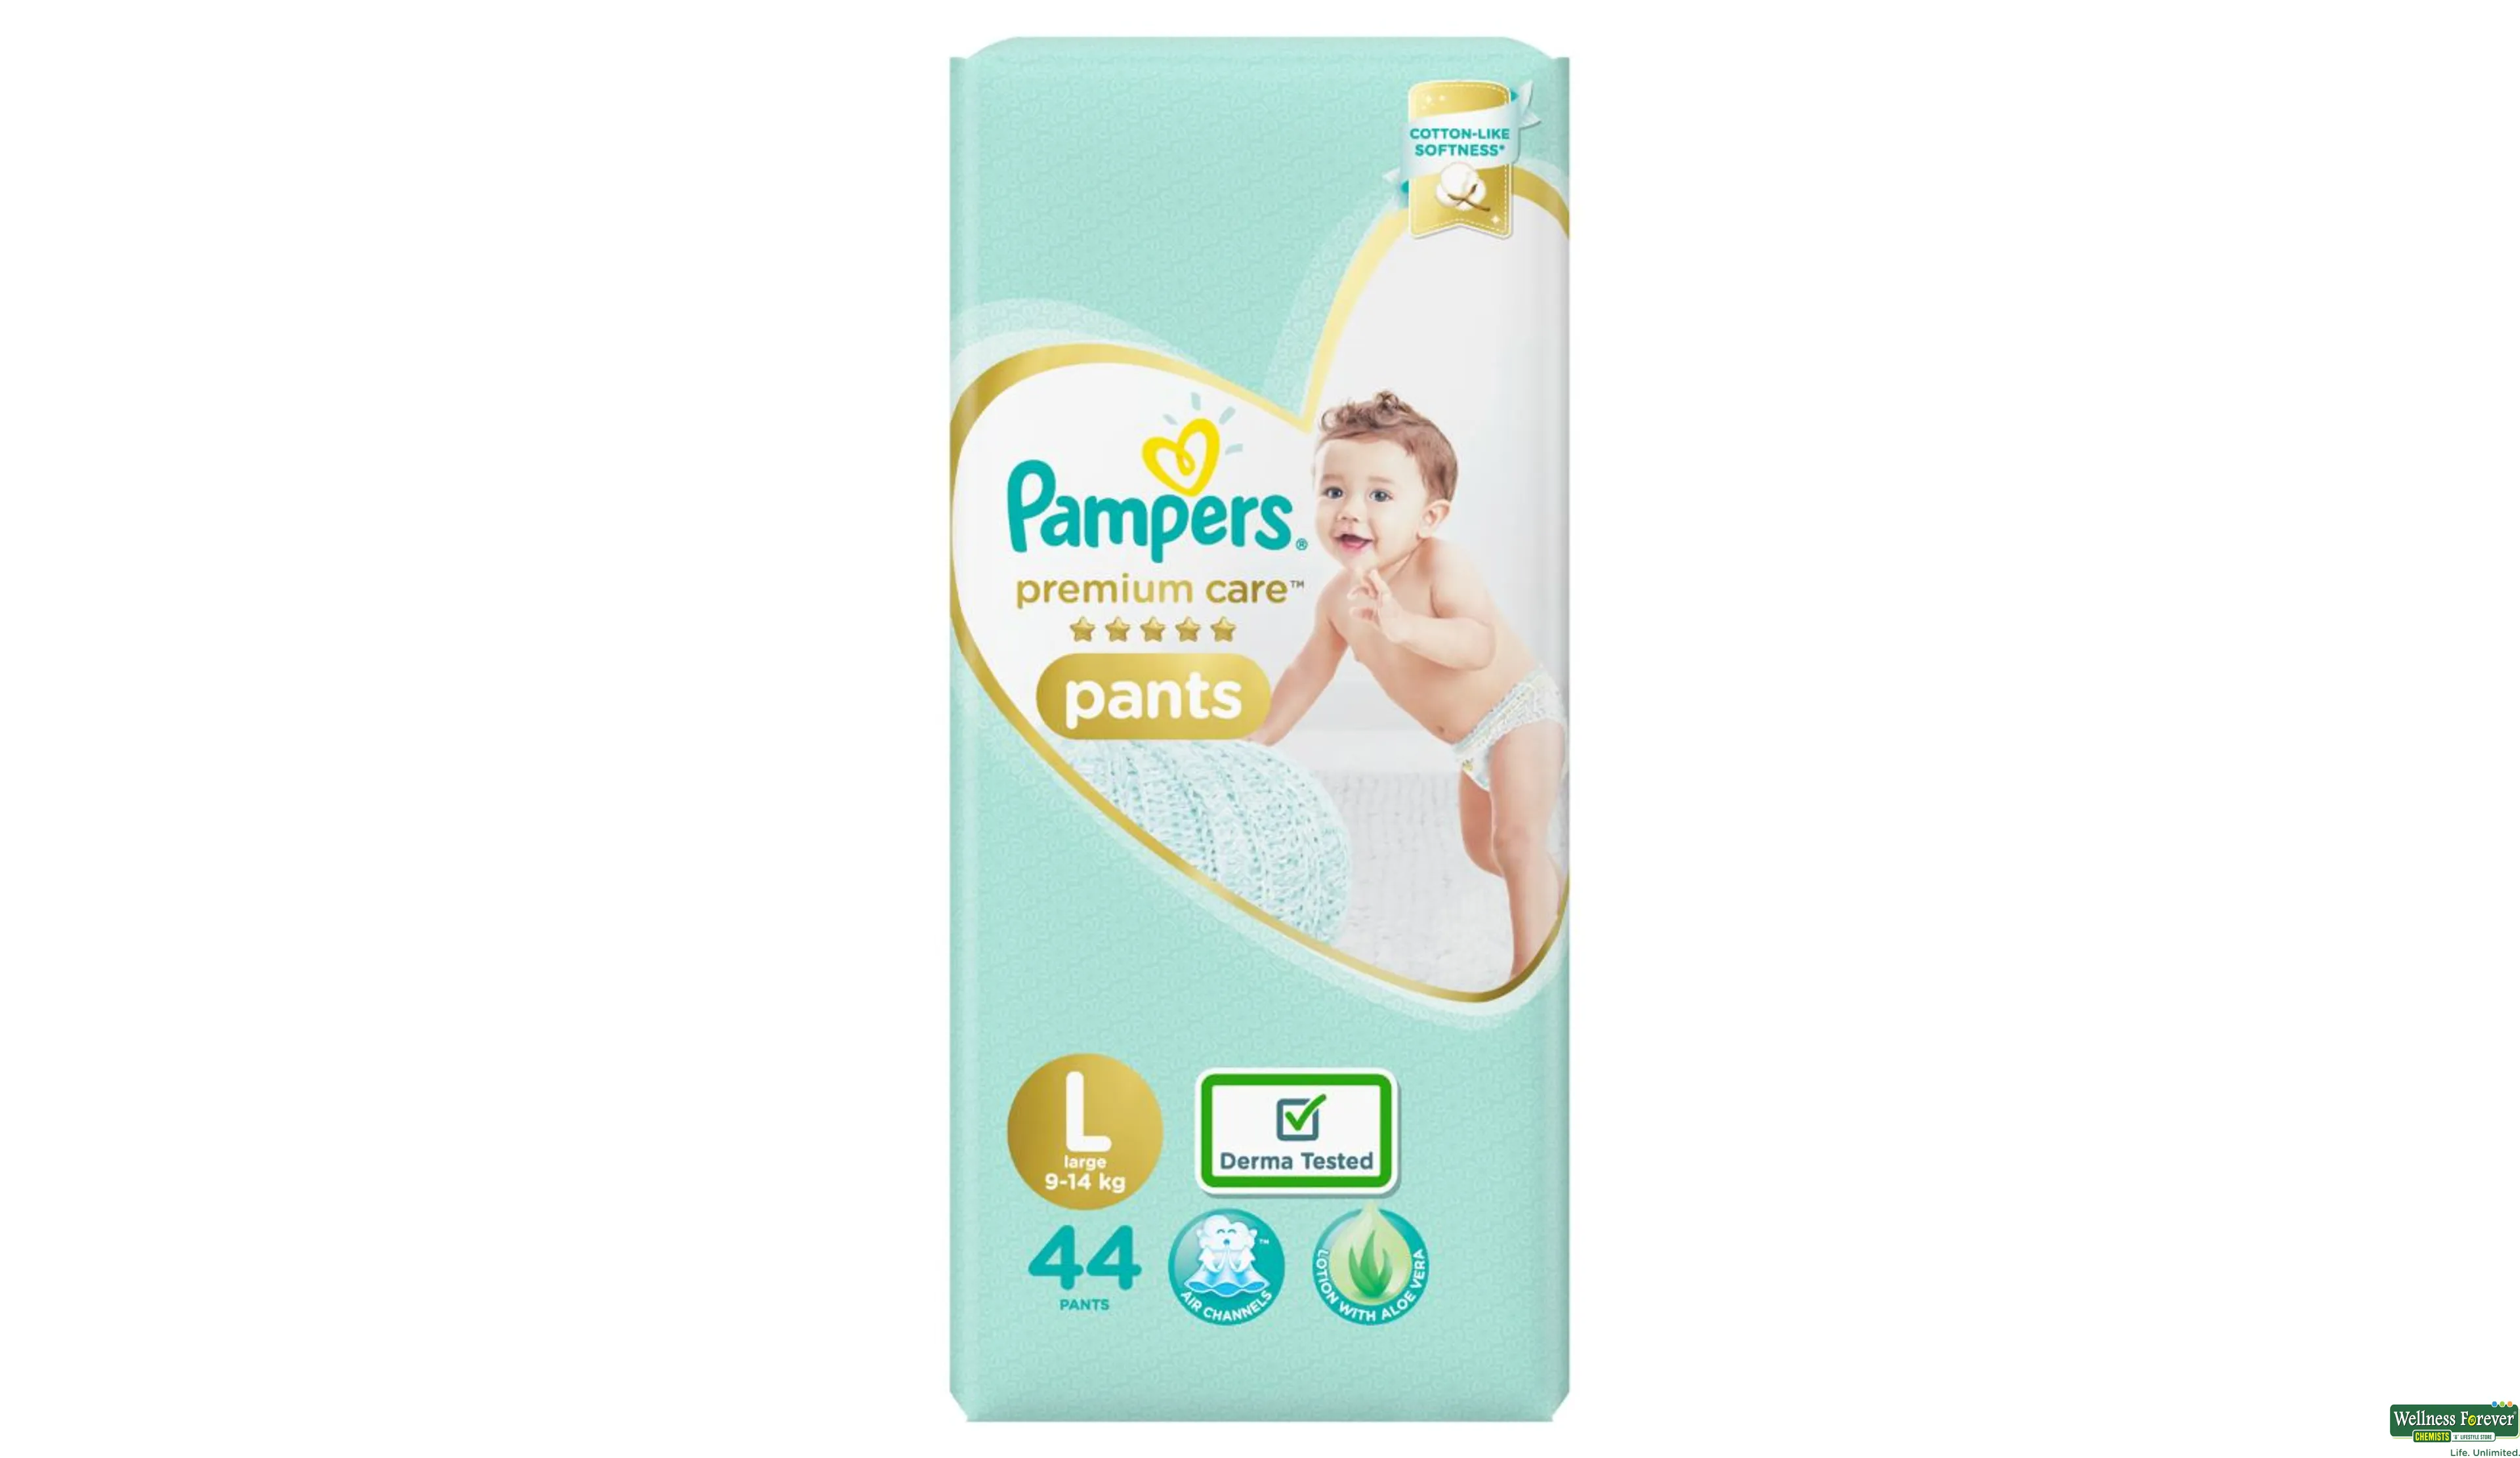 Baby :: Diapering :: Baby Diapers :: Pampers Premium Care Pants Large size  baby diapers (LG) 44 Count Softest ever Pampers pants & Active Baby Taped Diapers  Large size diapers (L) 18